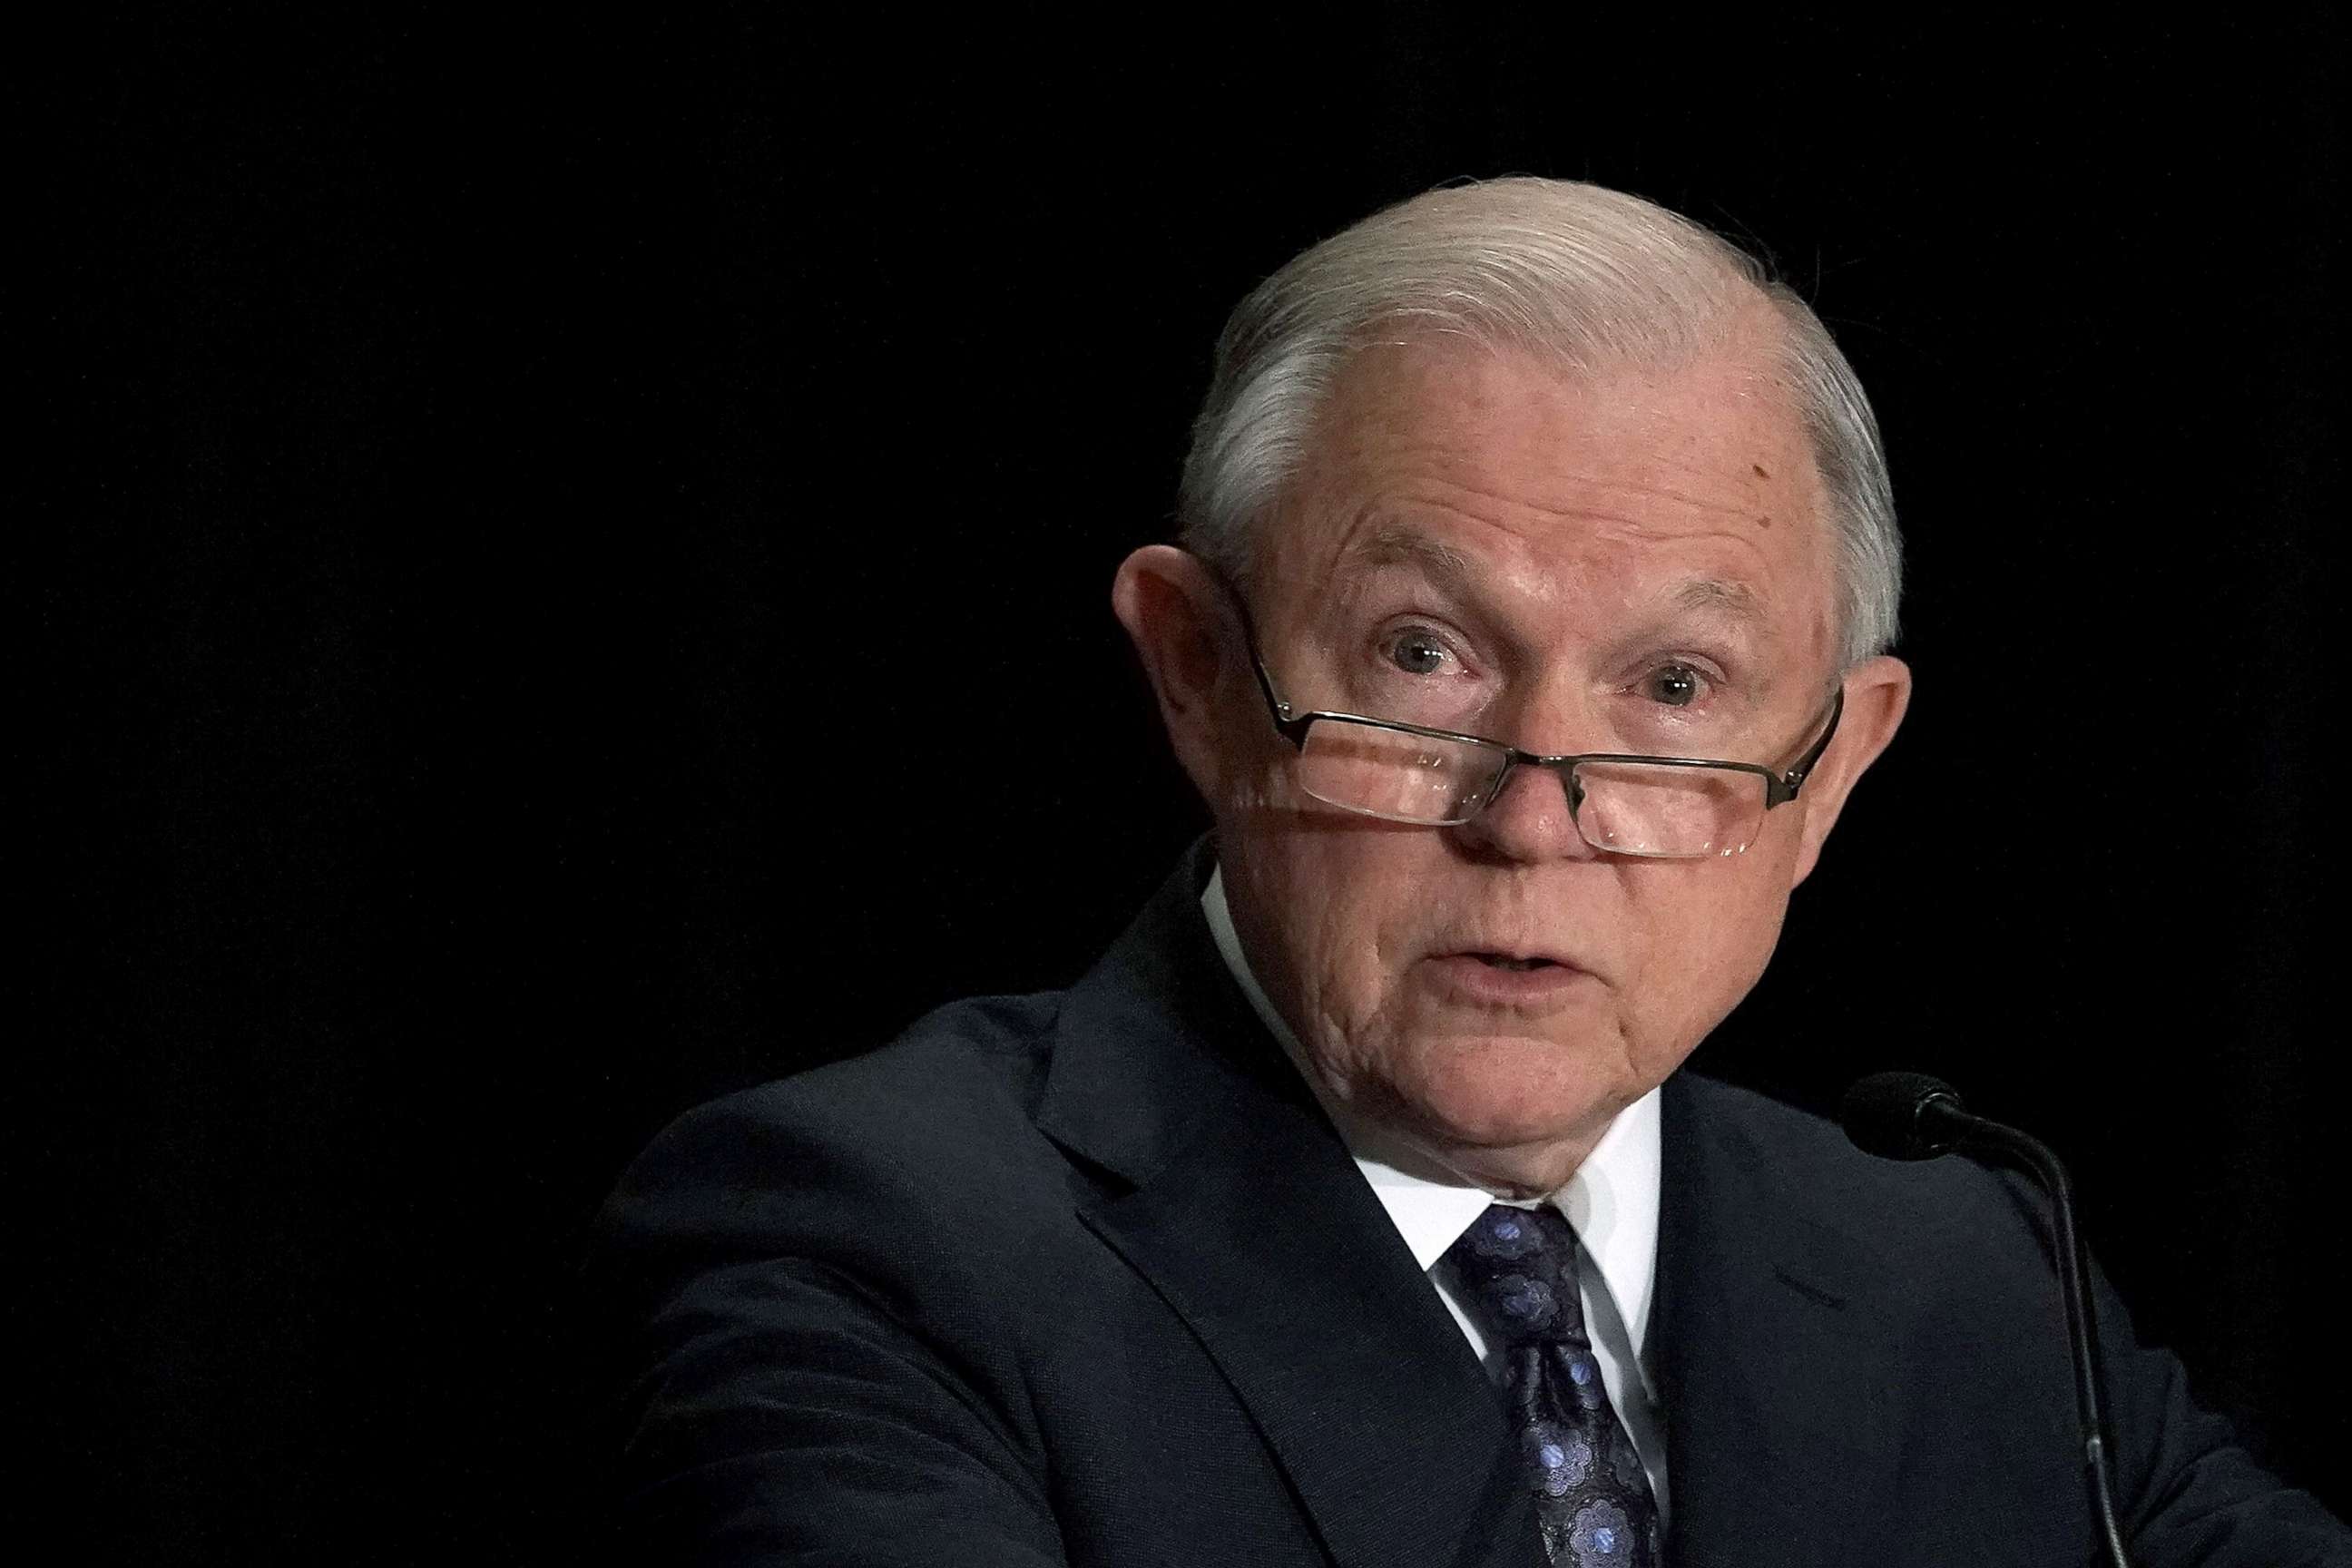 PHOTO: Jeff Sessions delivers remarks at the Justice Department's Executive Officer for Immigration Review (EOIR) Annual Legal Training Program, June 11, 2018, at the Sheraton Tysons Hotel in Tysons, Virginia.